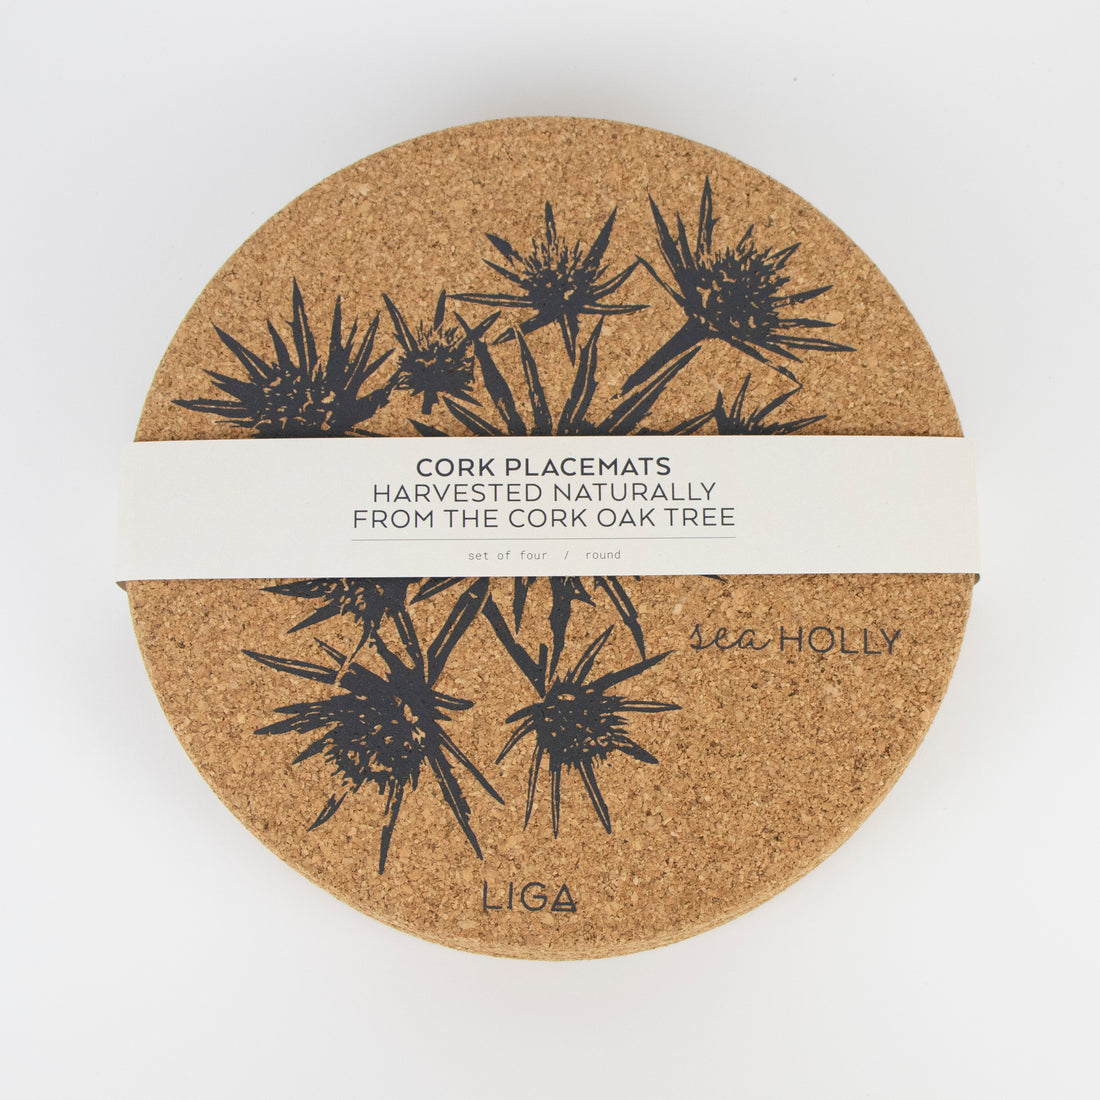 Cork Placemats | Sea Holly